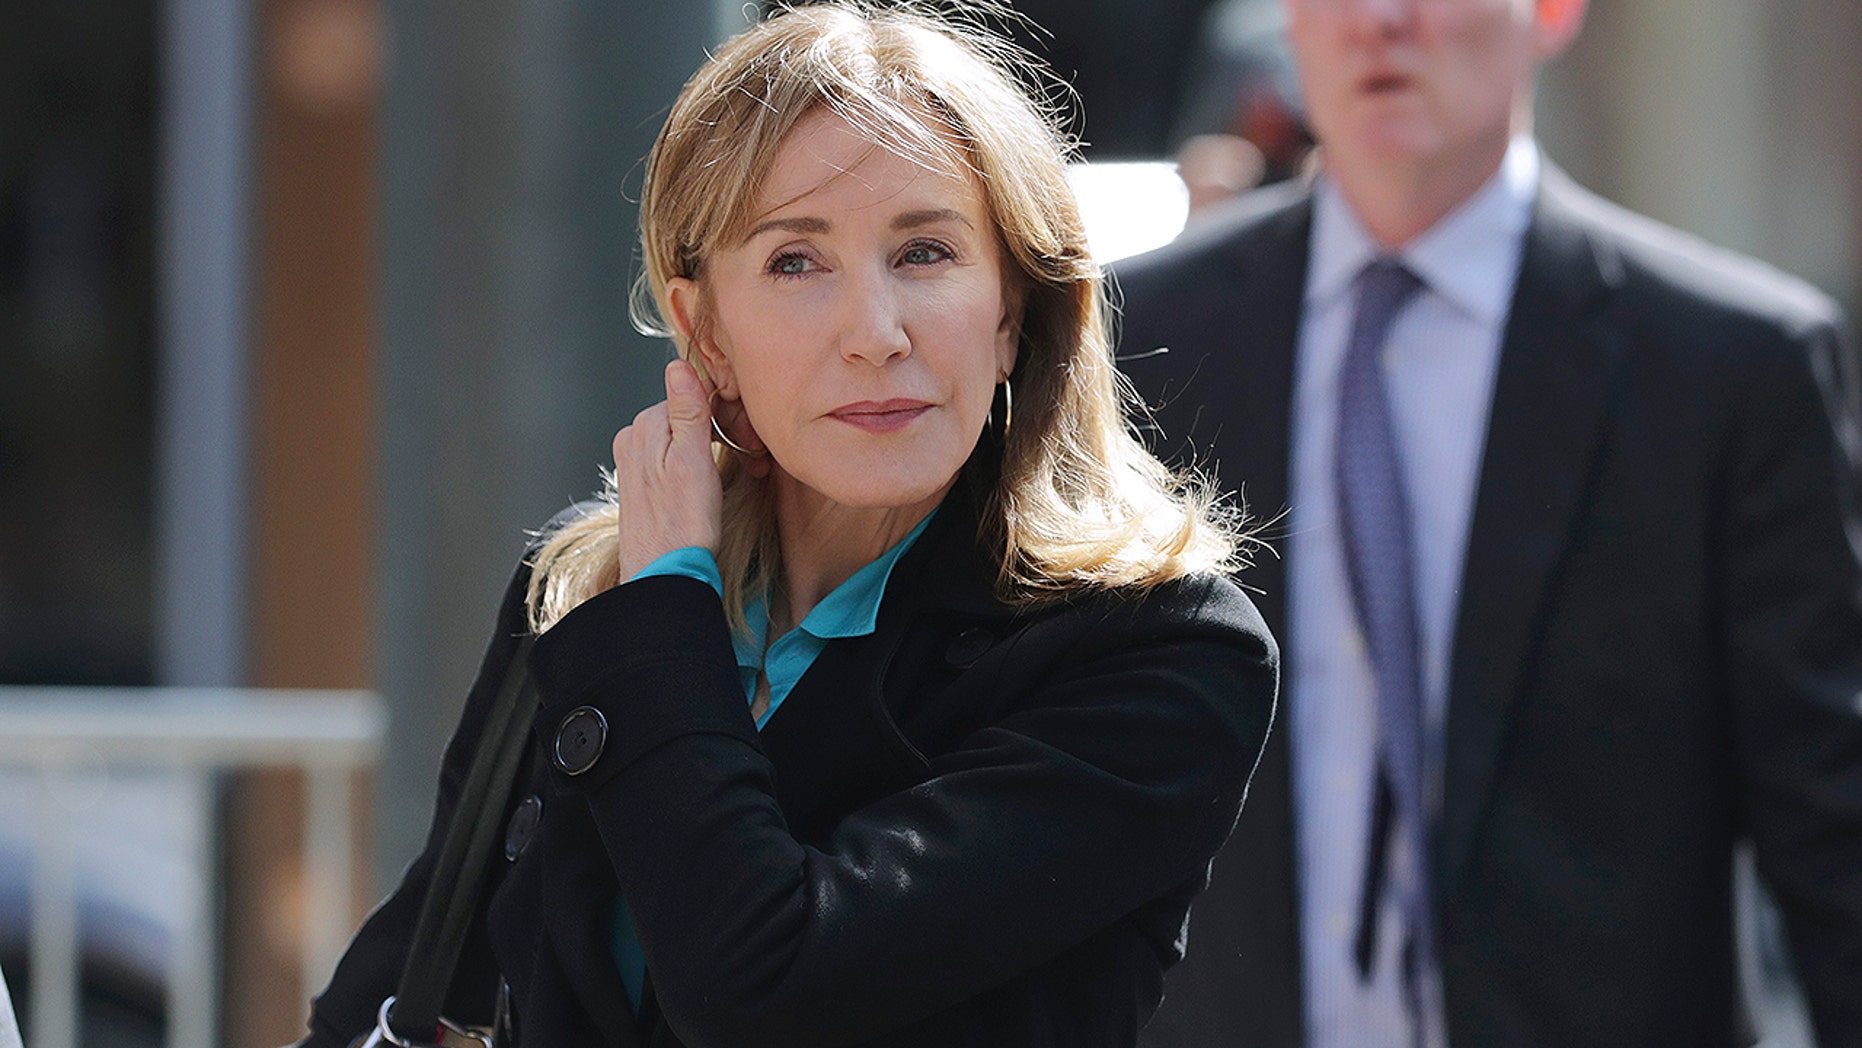 Actress Felicity Huffman appears in federal court in Boston on Wednesday, April 3, 2019 to face charges in connection with a corruption scandal at an American college. (Associated Press)